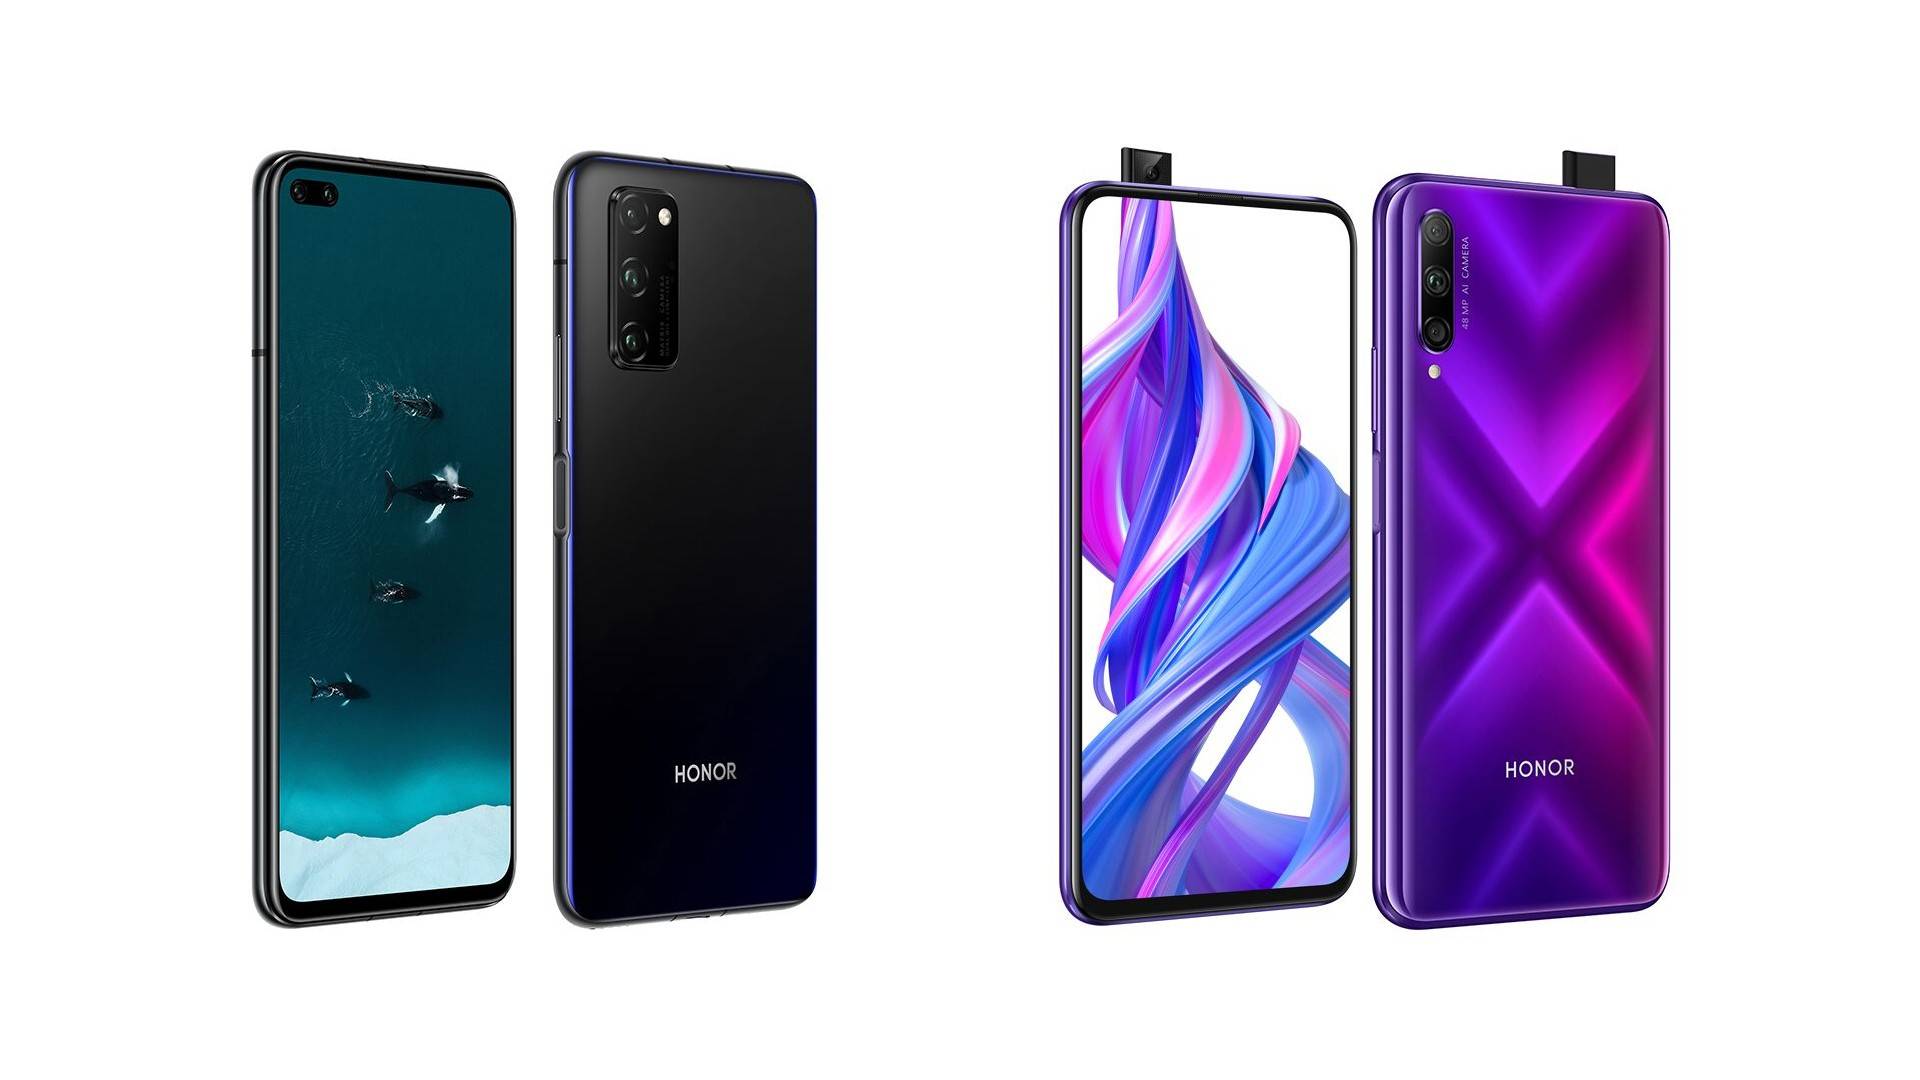 Honor x9a 5g 8. Honor 9x Pro. Хонор x9a 5g. Honor 9x Box. For Honor 9x Pro.